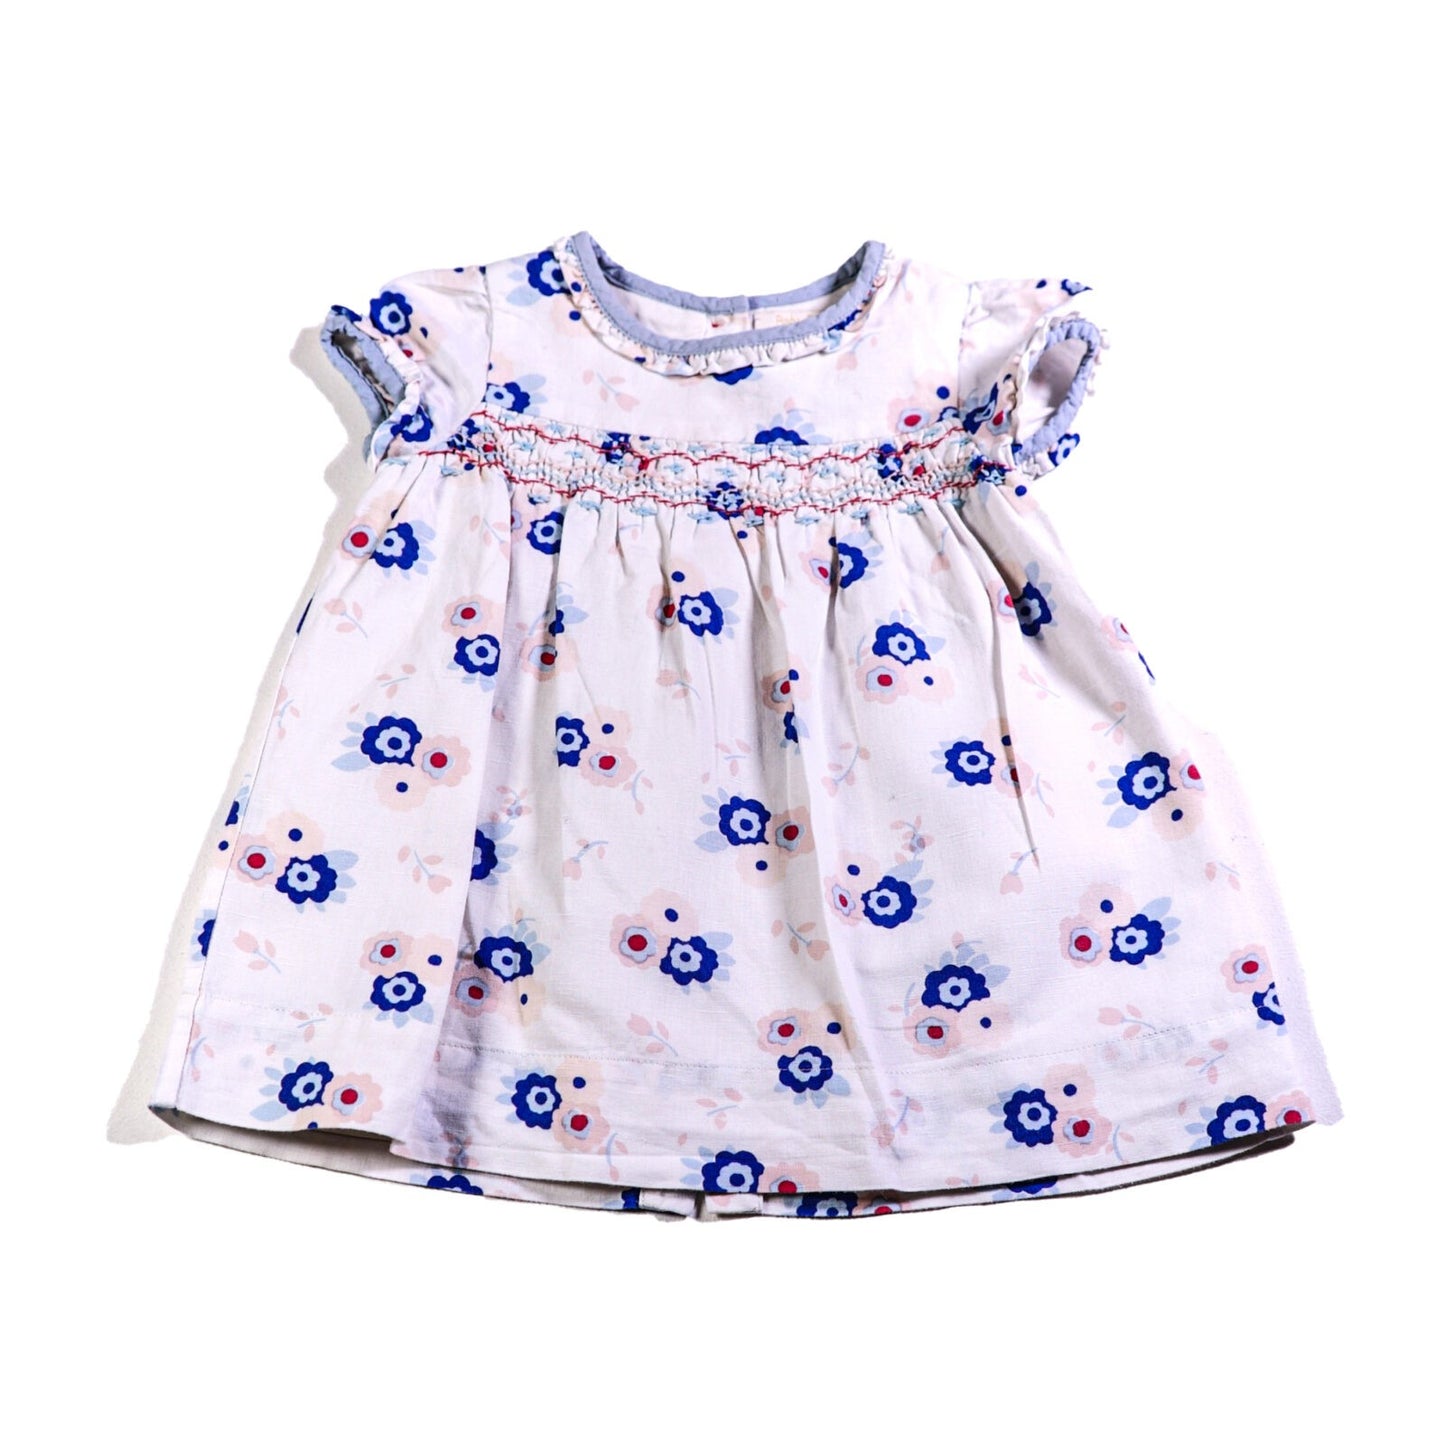 Cotton linen flower print dress with smocking